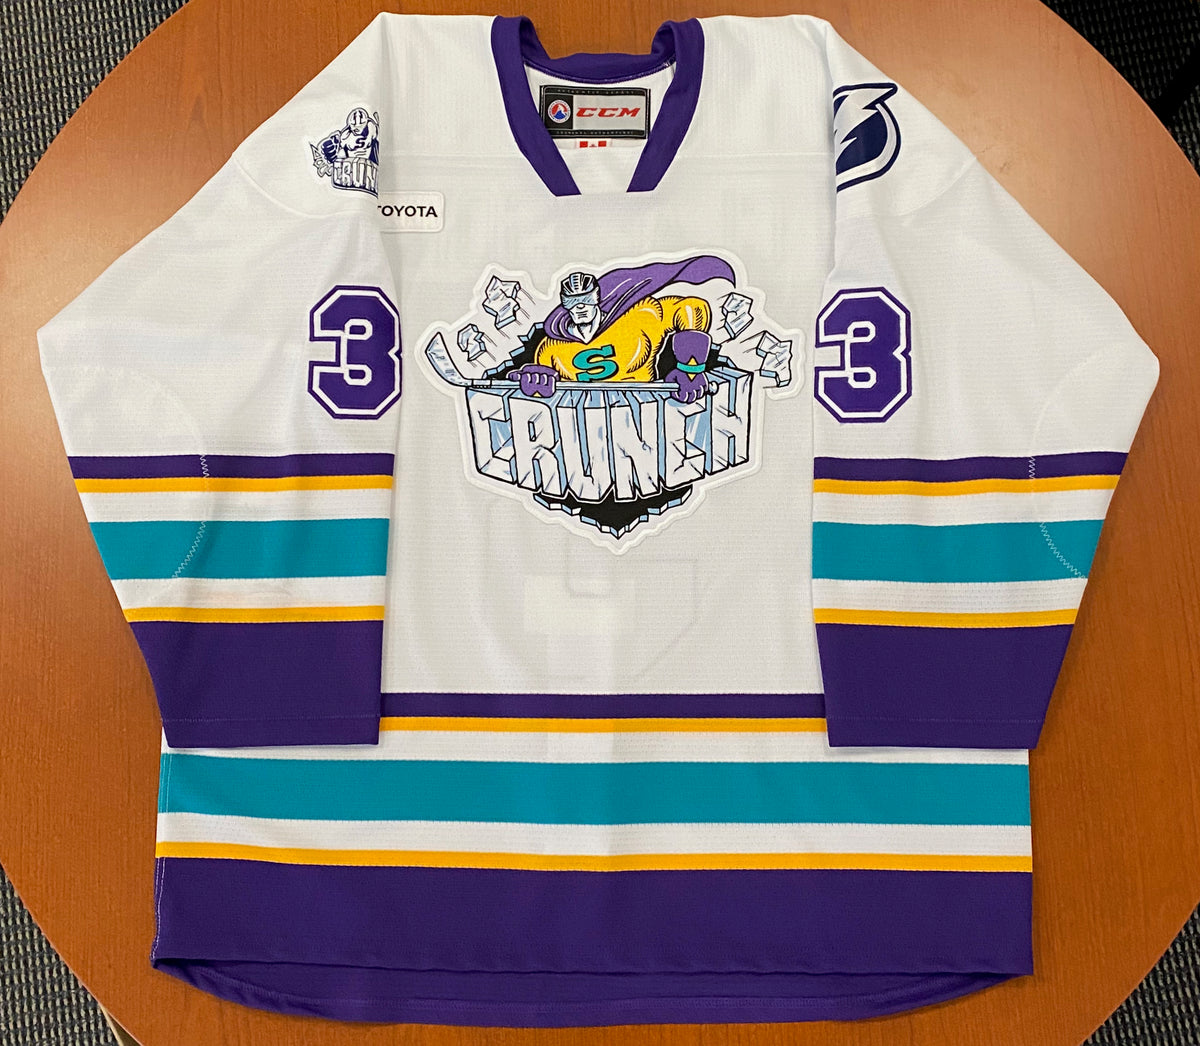 81 Remi Elie Opening Night Jersey - October 23, 2021 – Syracuse